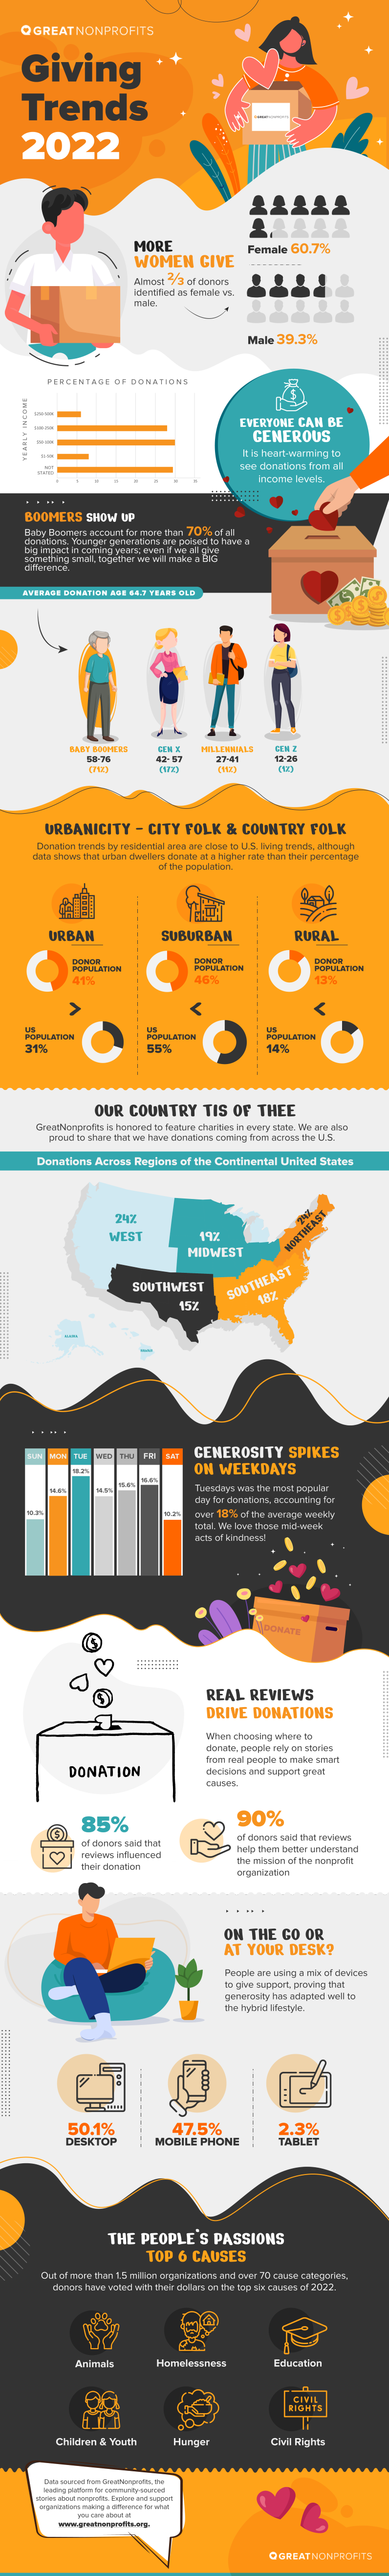 Generosity by the Numbers: Giving Trends 2022 [INFOGRAPHIC]